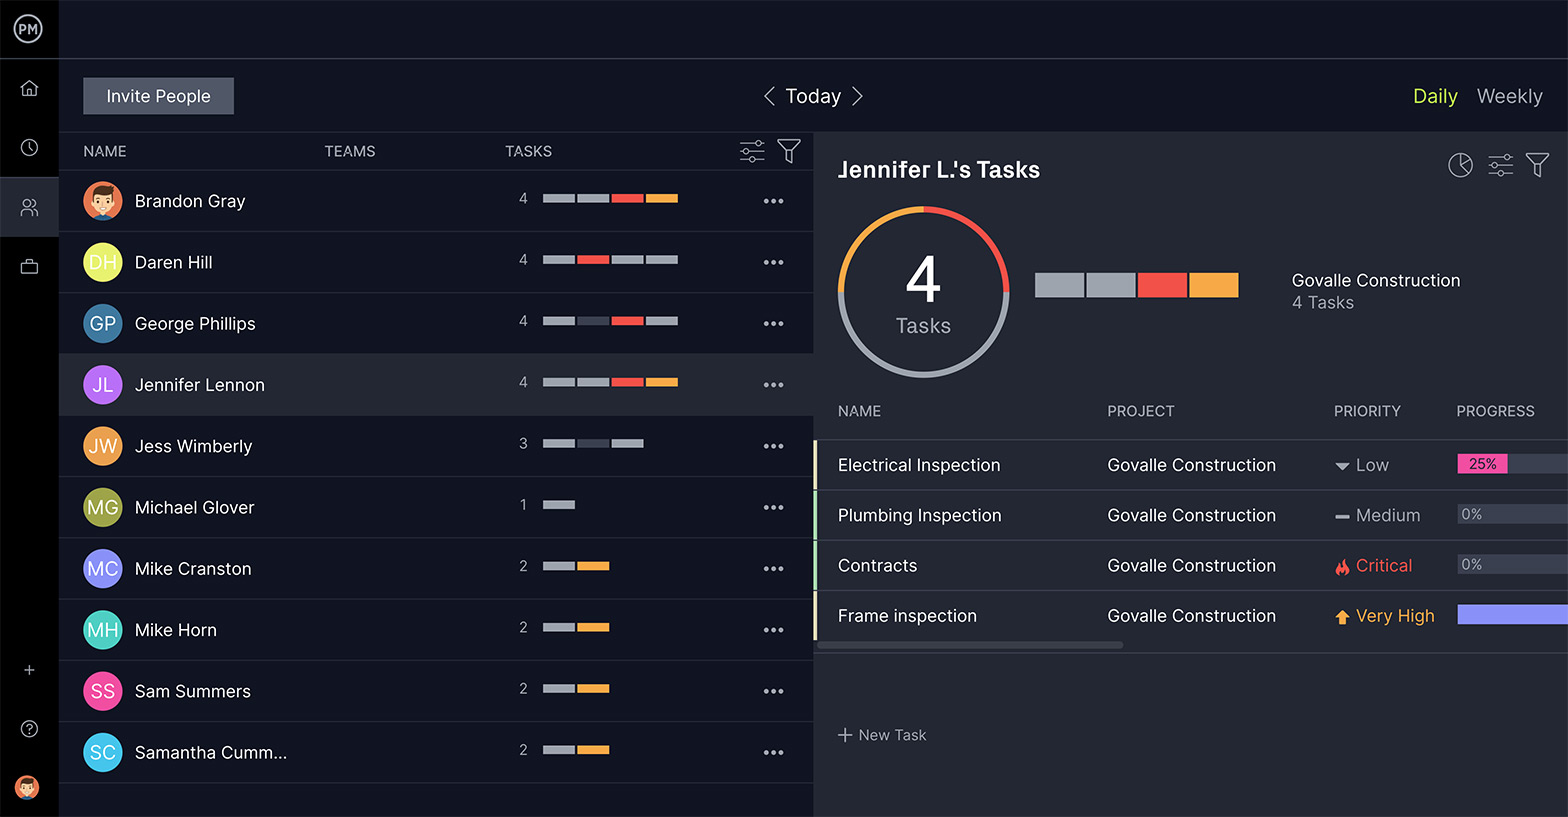 ProjectManager's team management dashboard lets you manage your human resources